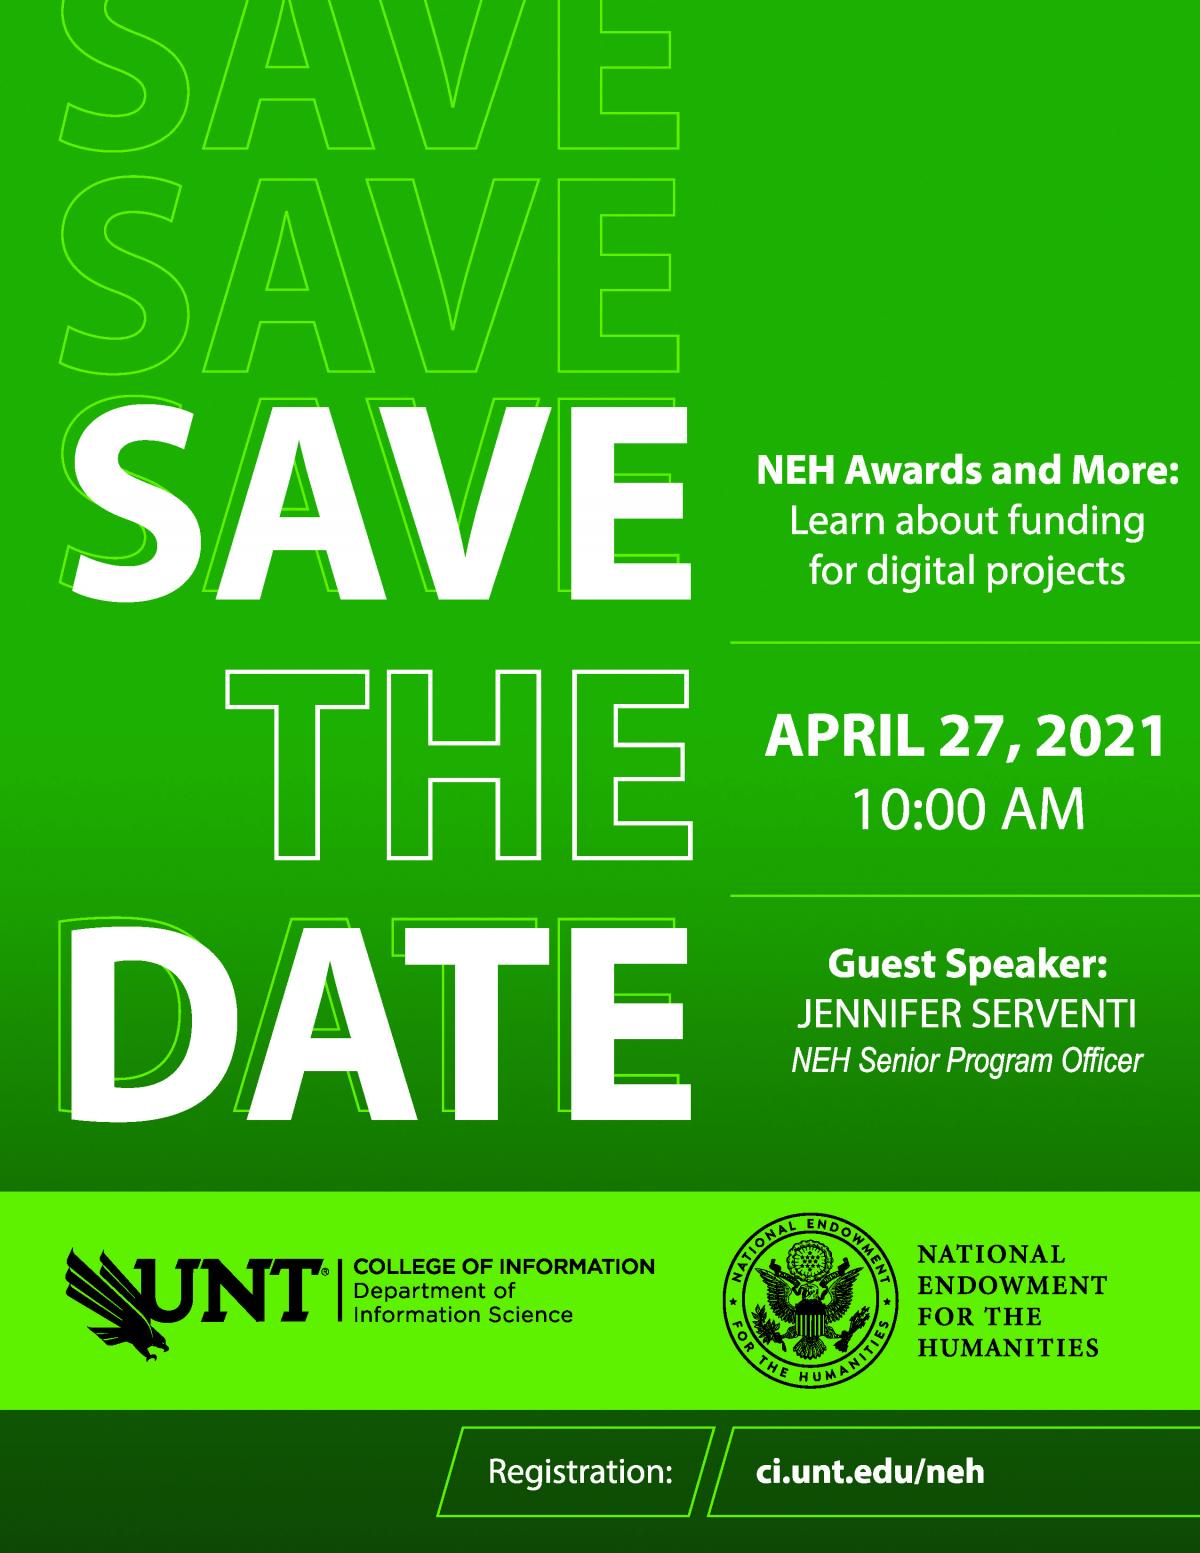 Save the Date. NEH Awards and More: Learn about funding for digital projects. April 27, 2021 10AM. Guest Speaker Jennifer Serventi NEH Senior Program Officer. College of Information Department of Information Science. National Endowment for the Humanities. Registration: ci.unt.edu/neh